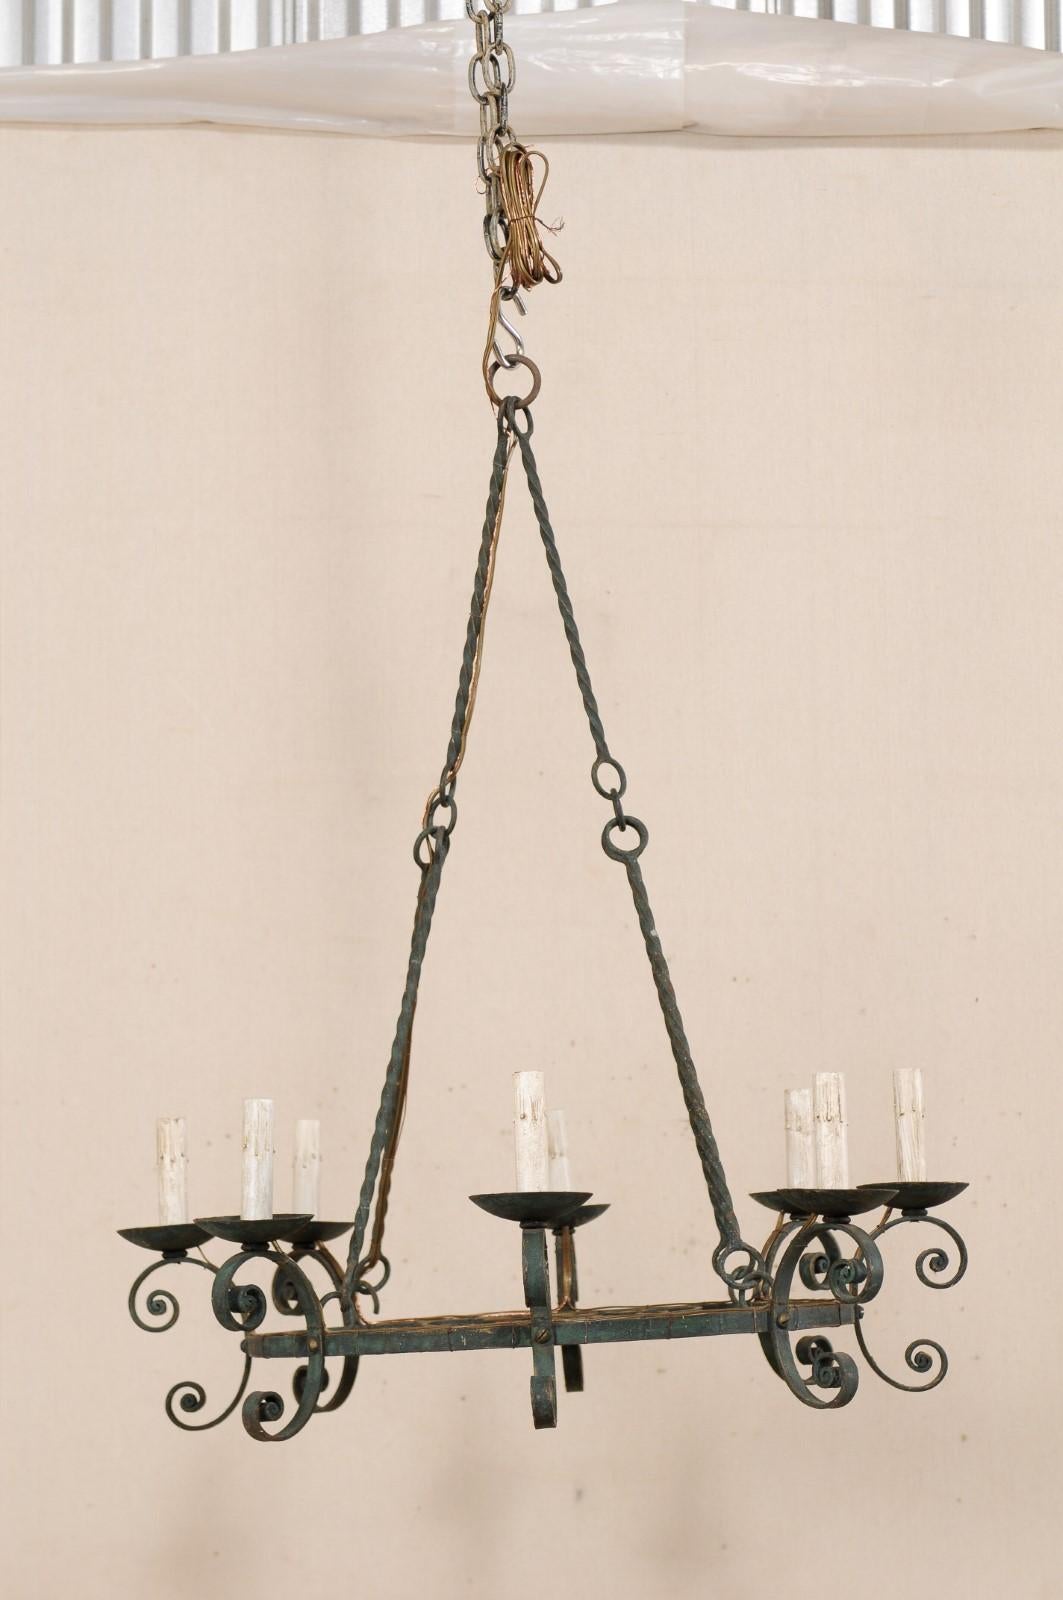 Forged Mid-20th Century French Round Scrolled Iron Chandelier with Lovely Patina